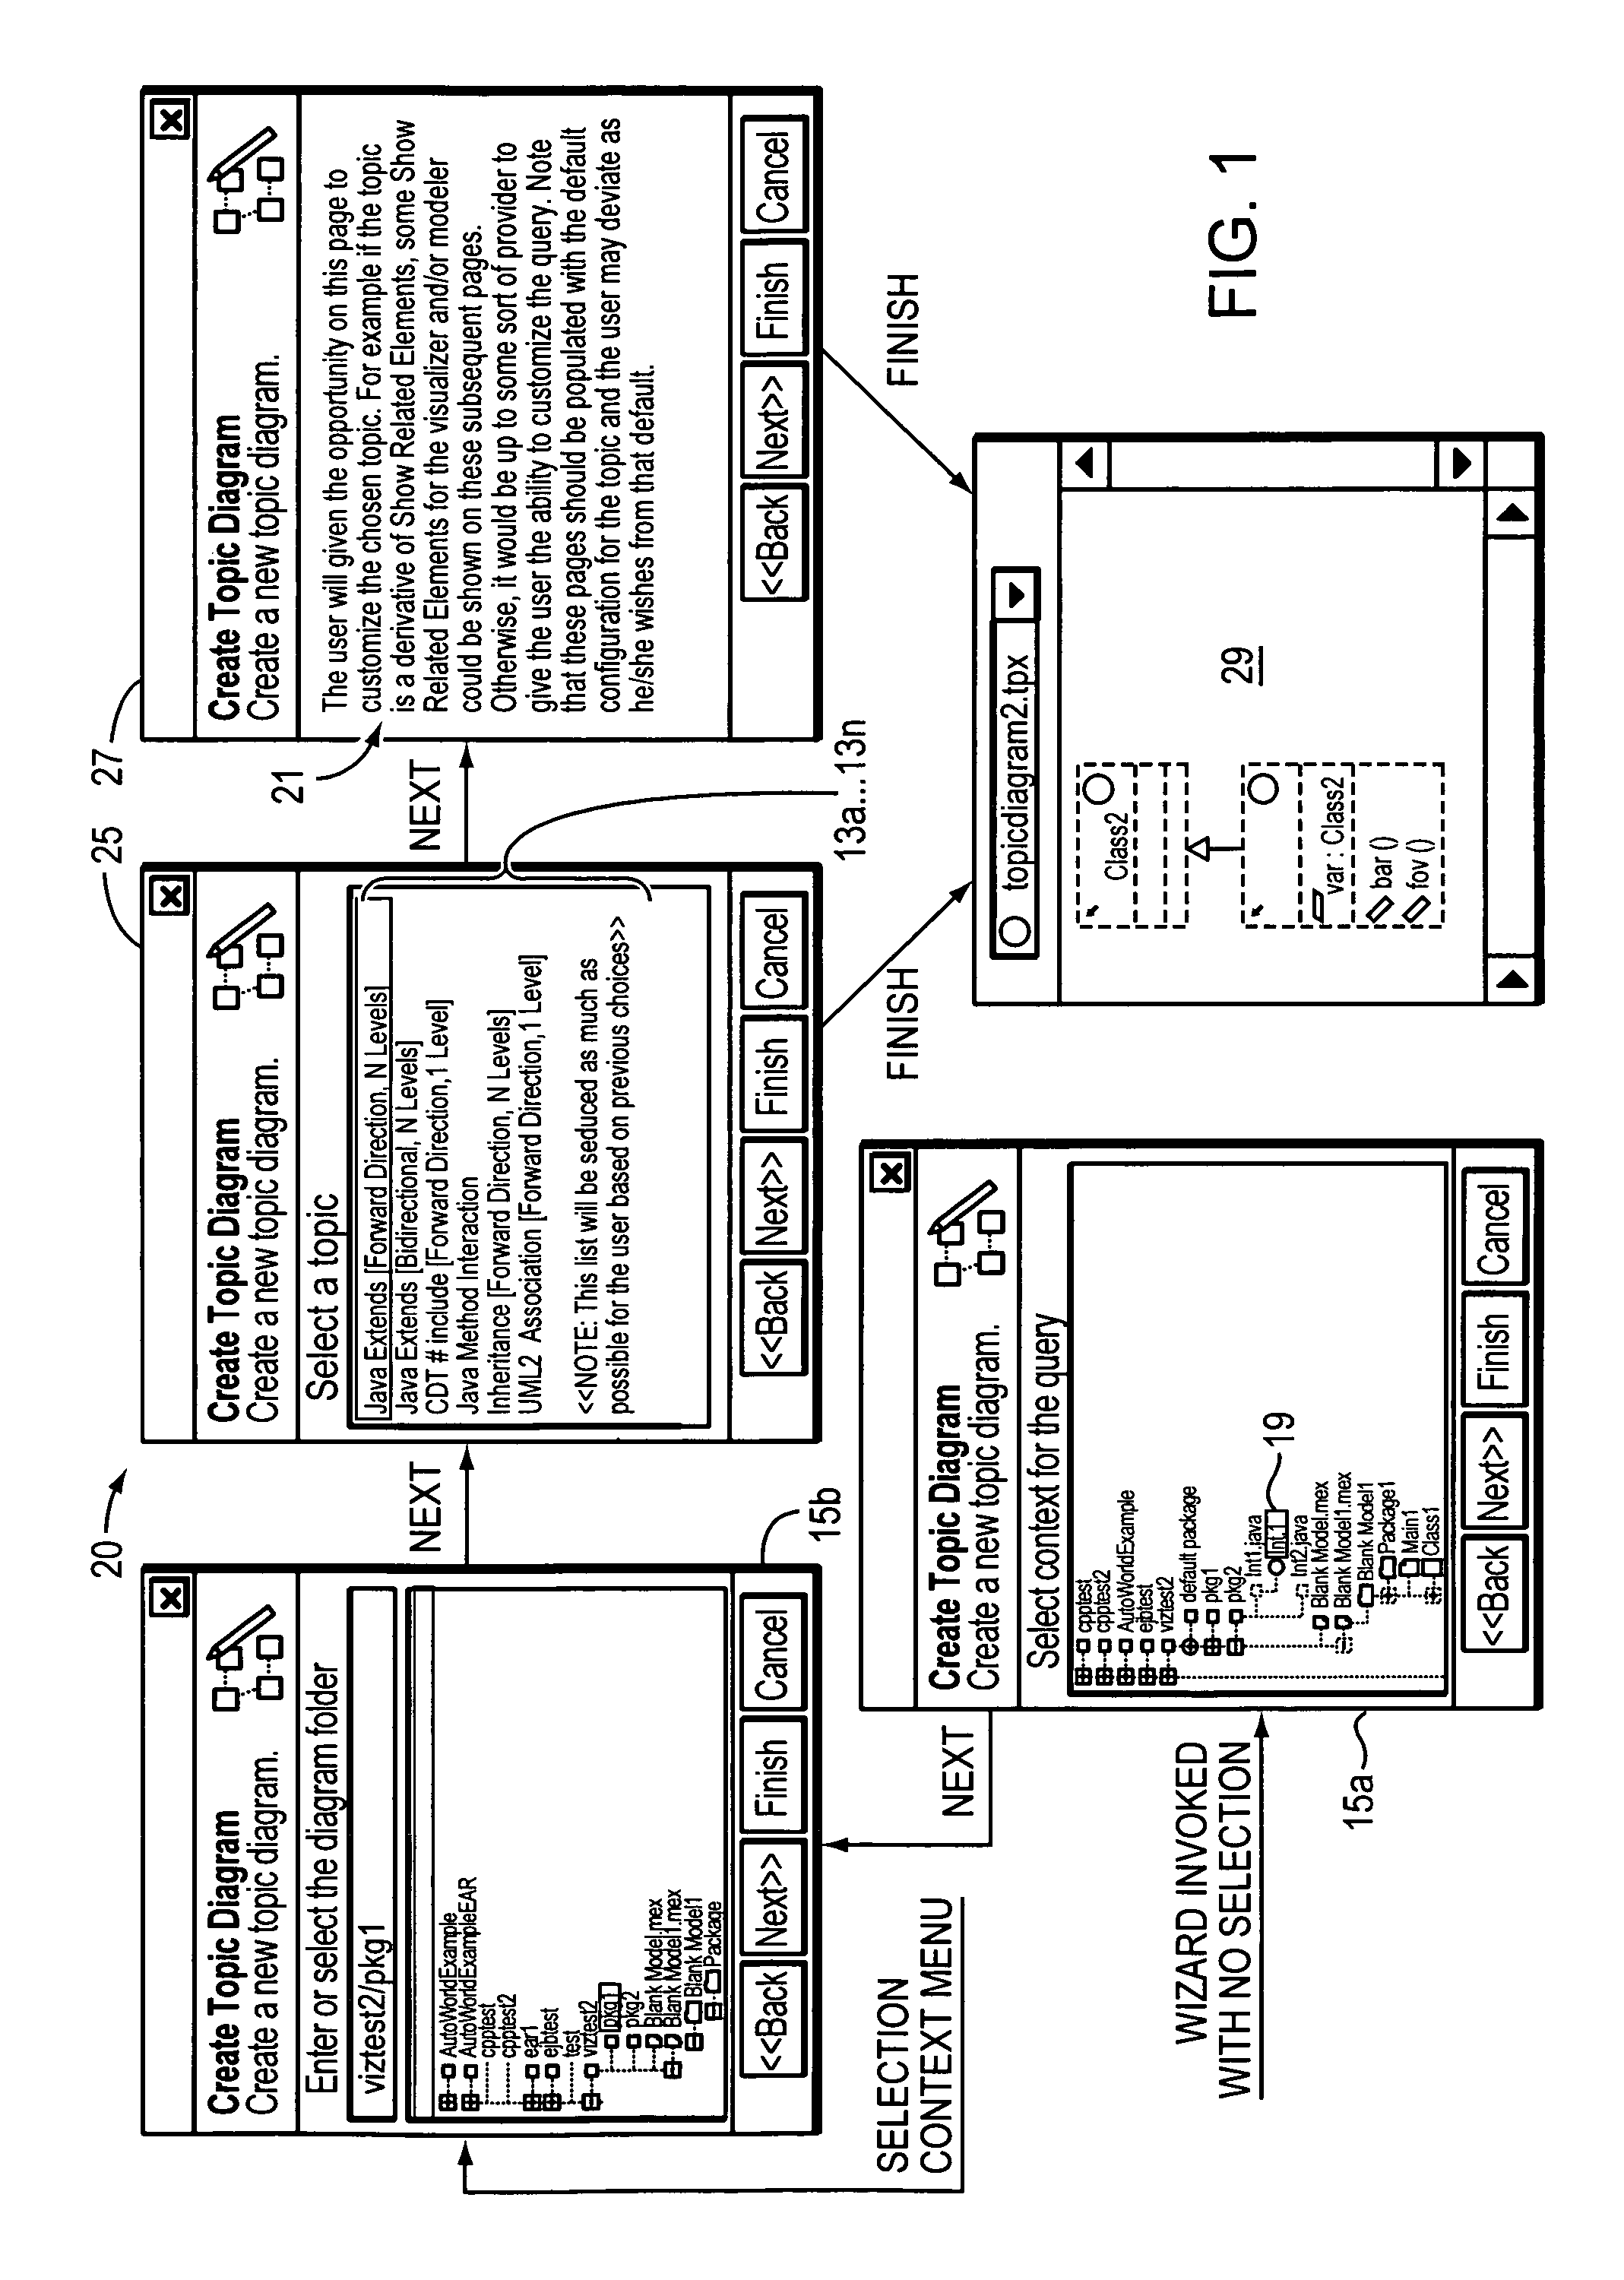 Computer method and apparatus for representing a topic in a software modeling system